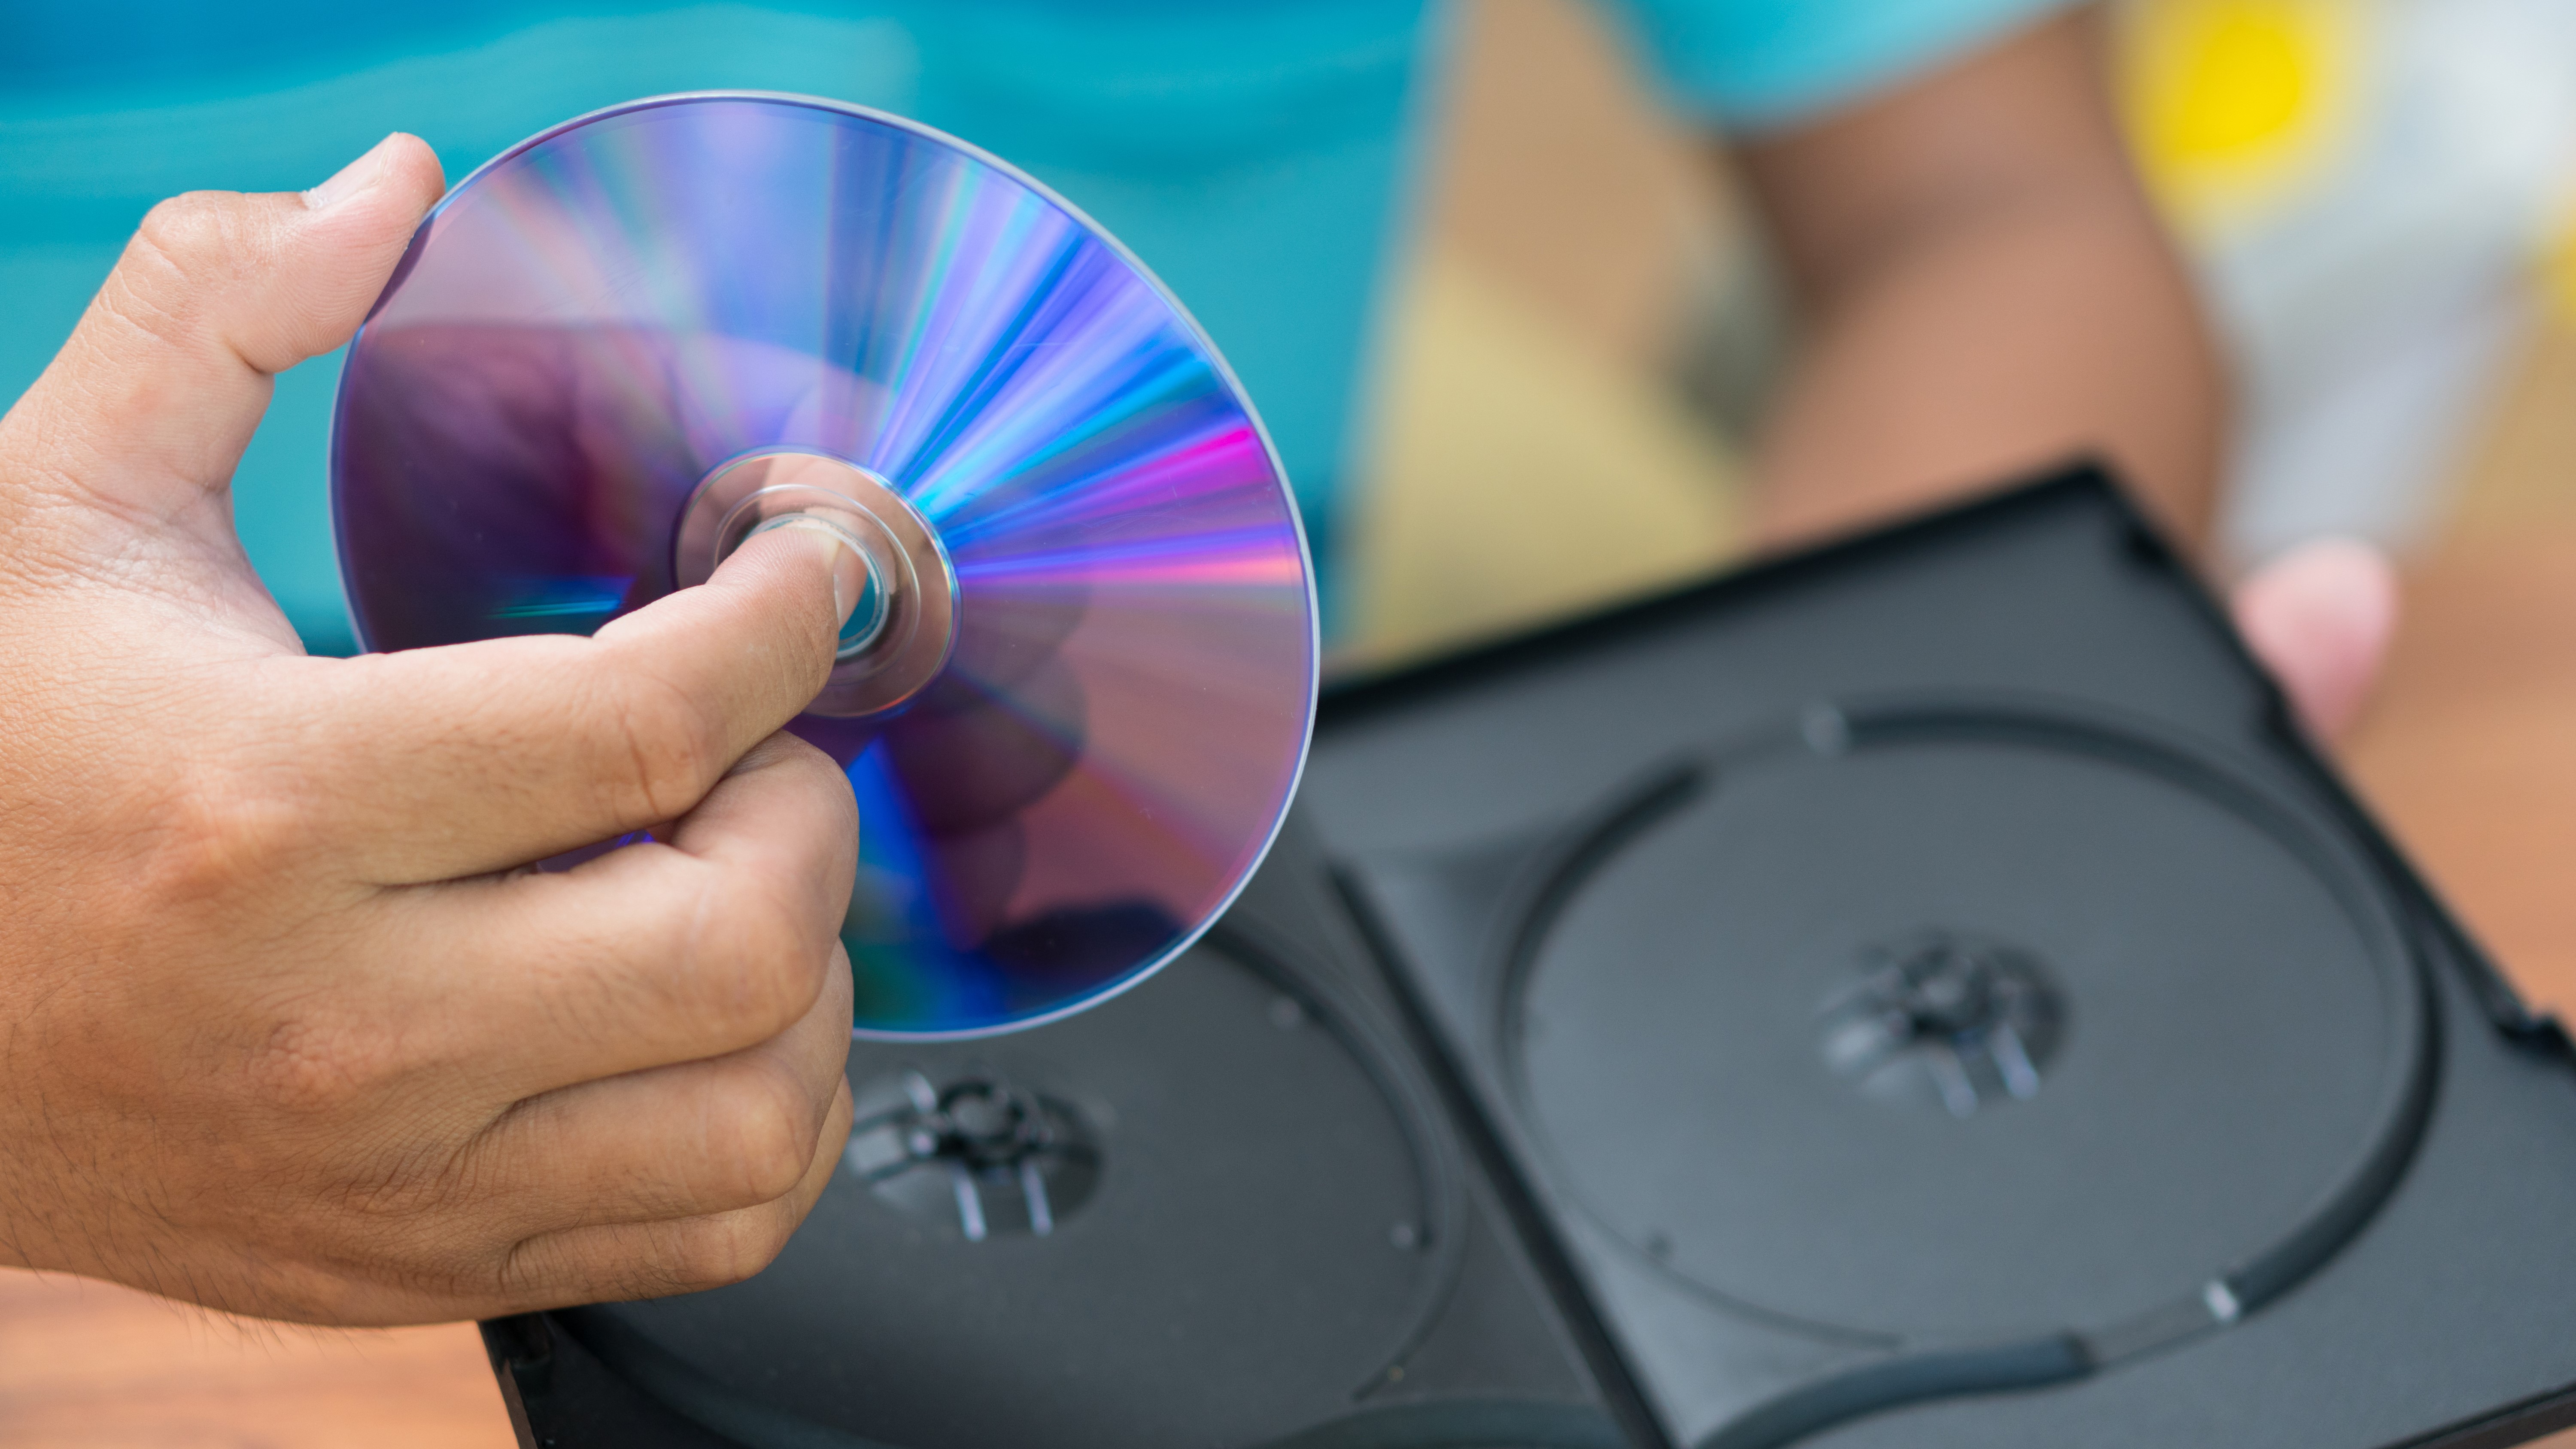 the best free dvd ripping software